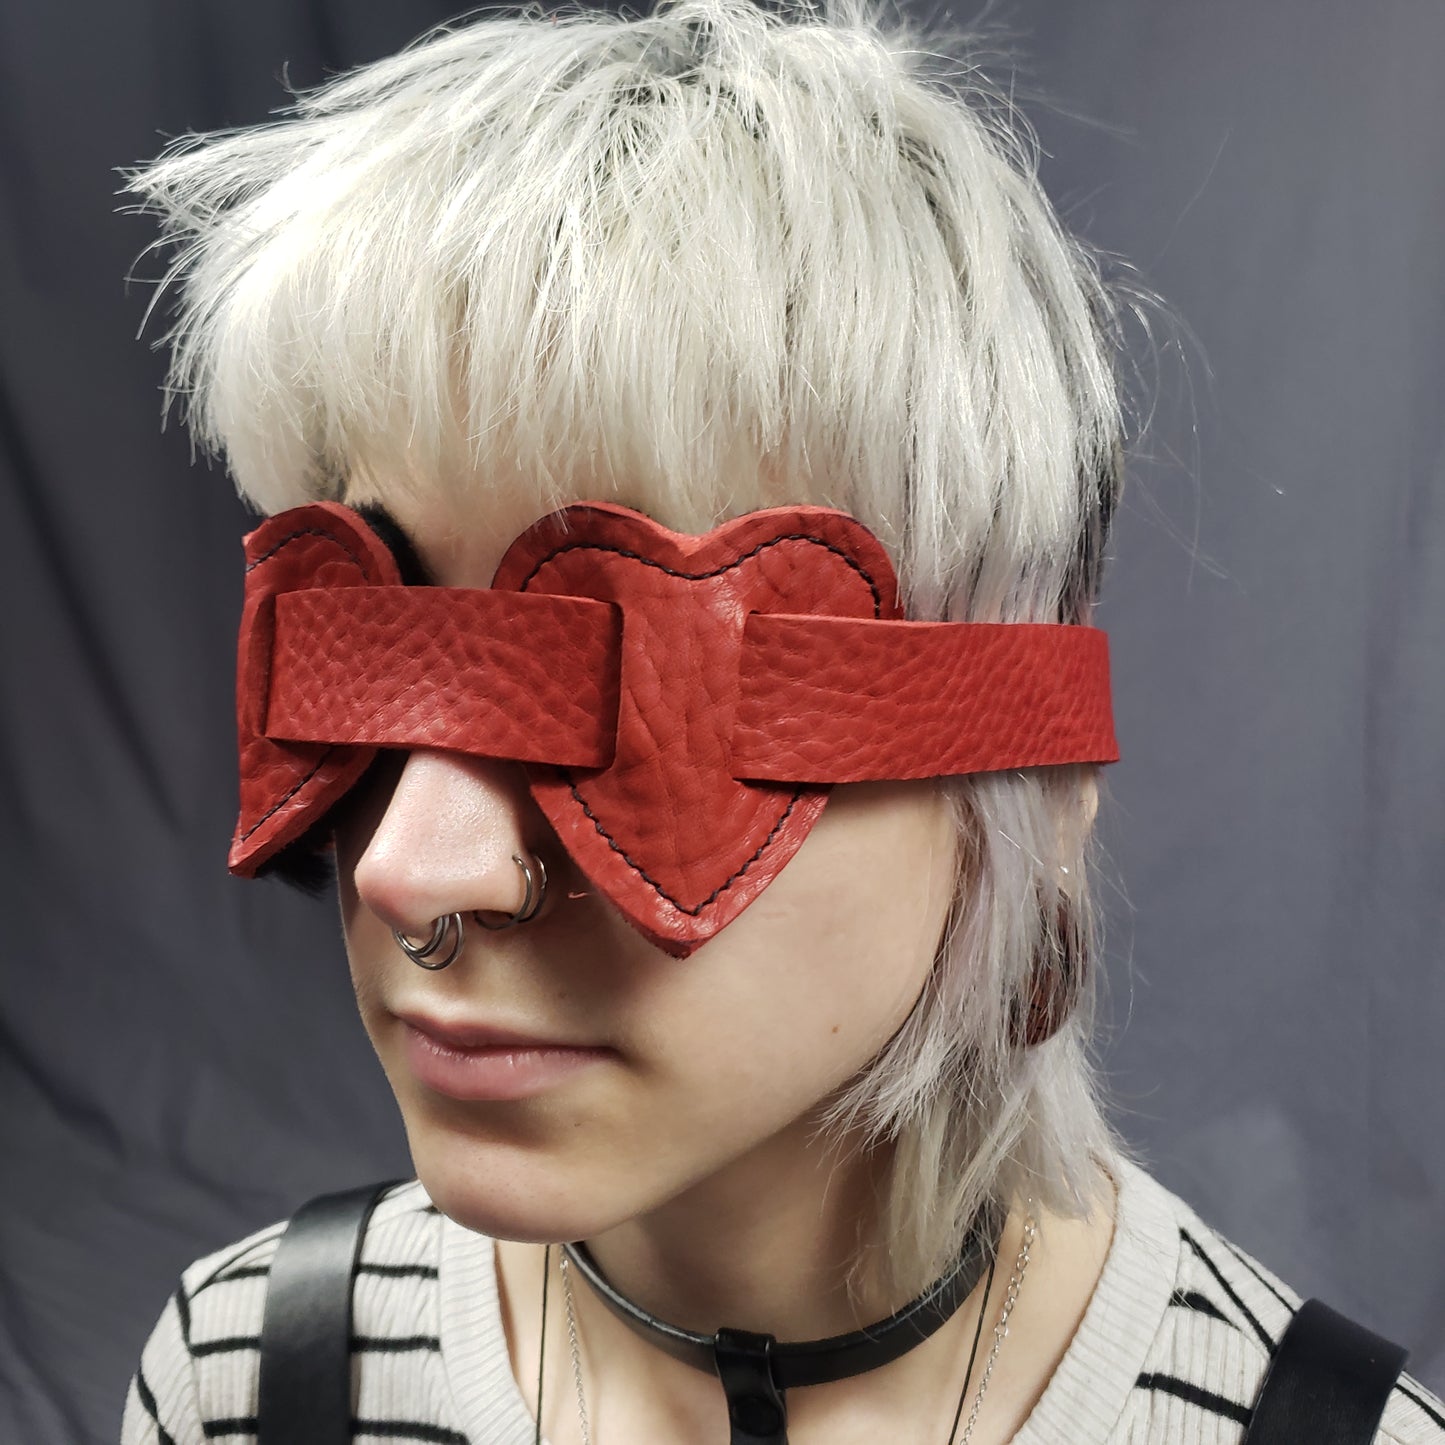 A model wearing the Red Leather Heart Eye Muffs.